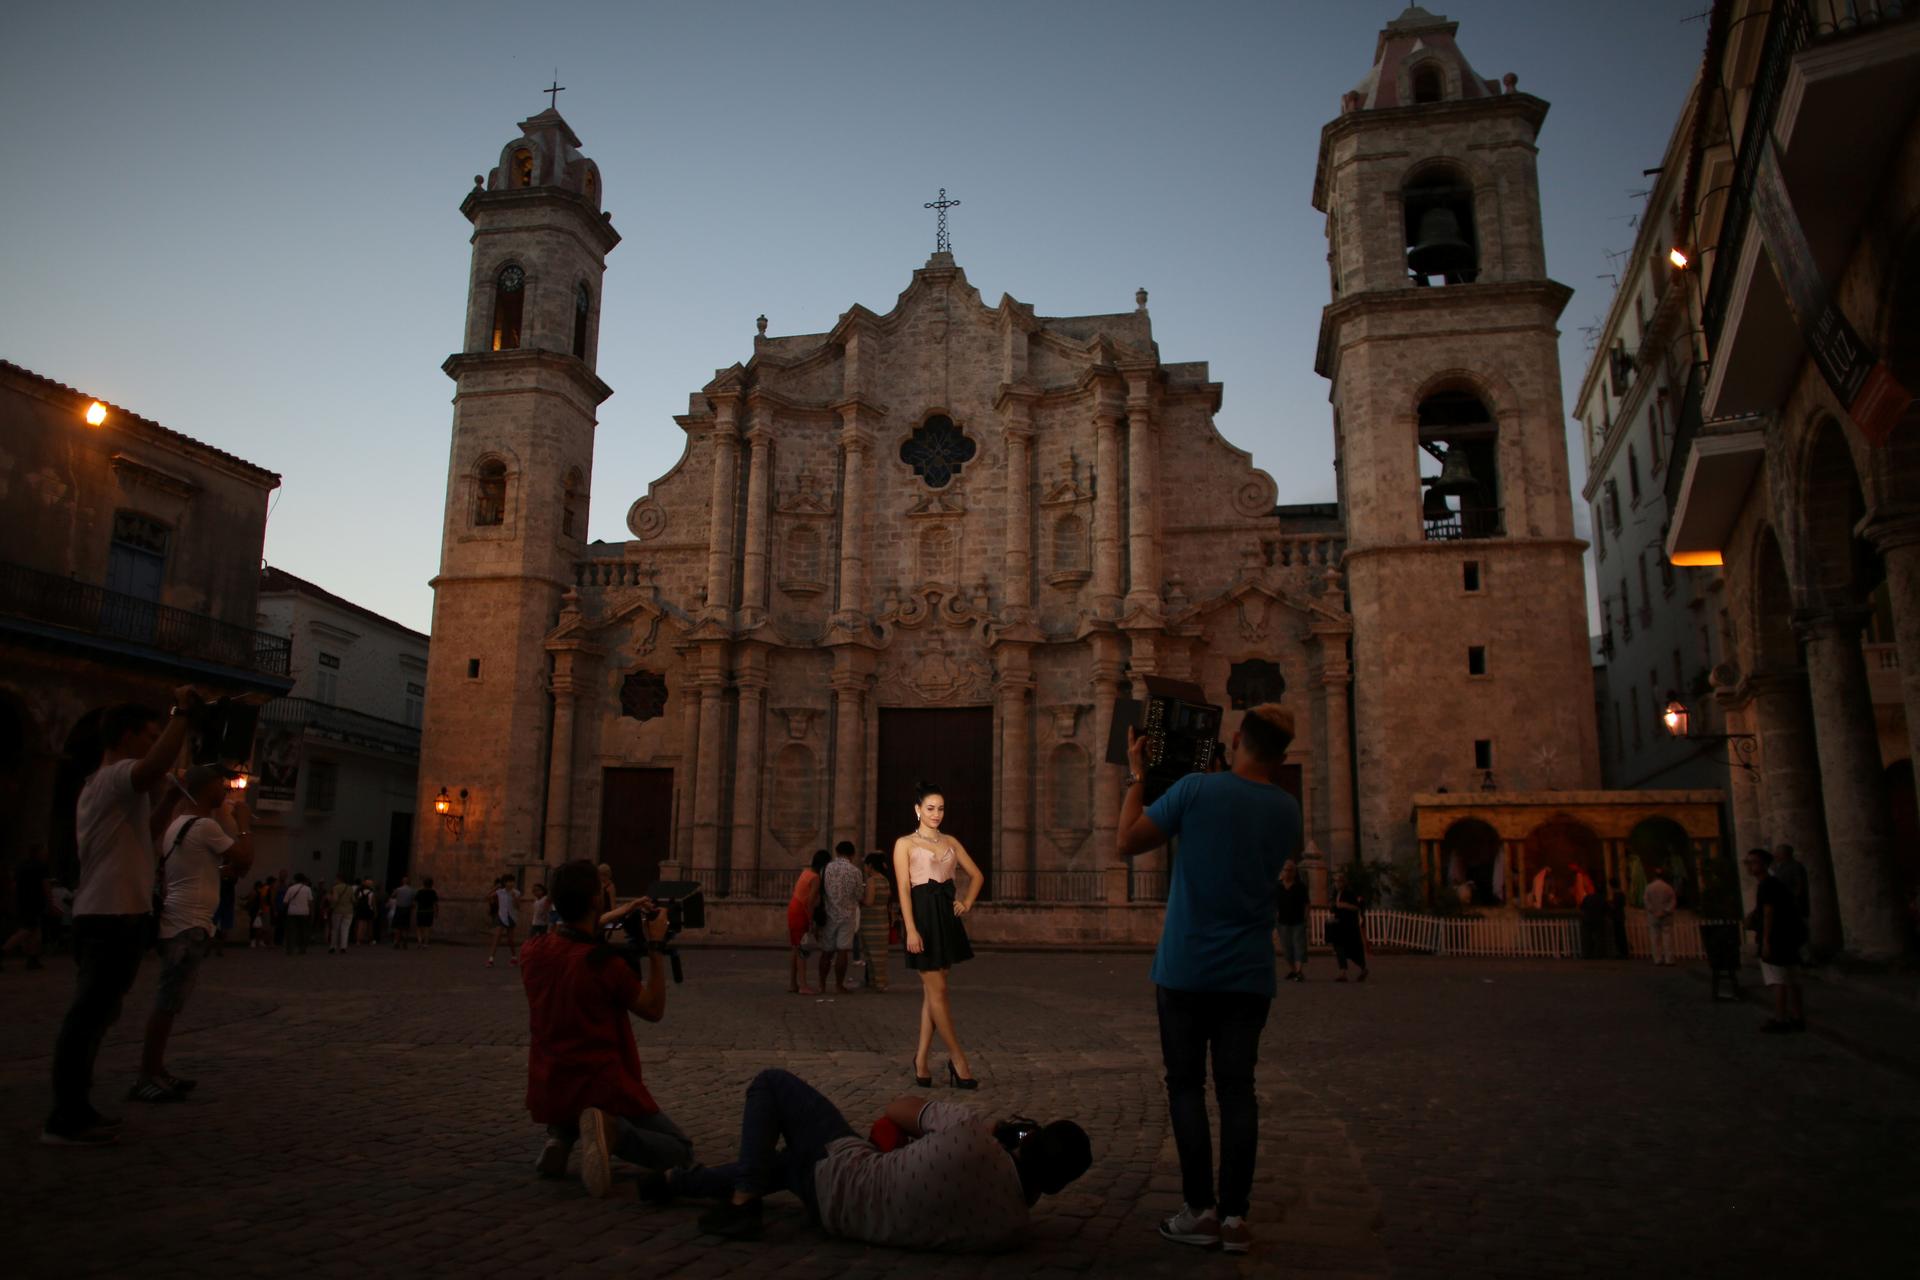 Yazuli Lloret, 15, poses for a photographer at the Cathedral Square in Havana, Cuba, December 27, 2016.